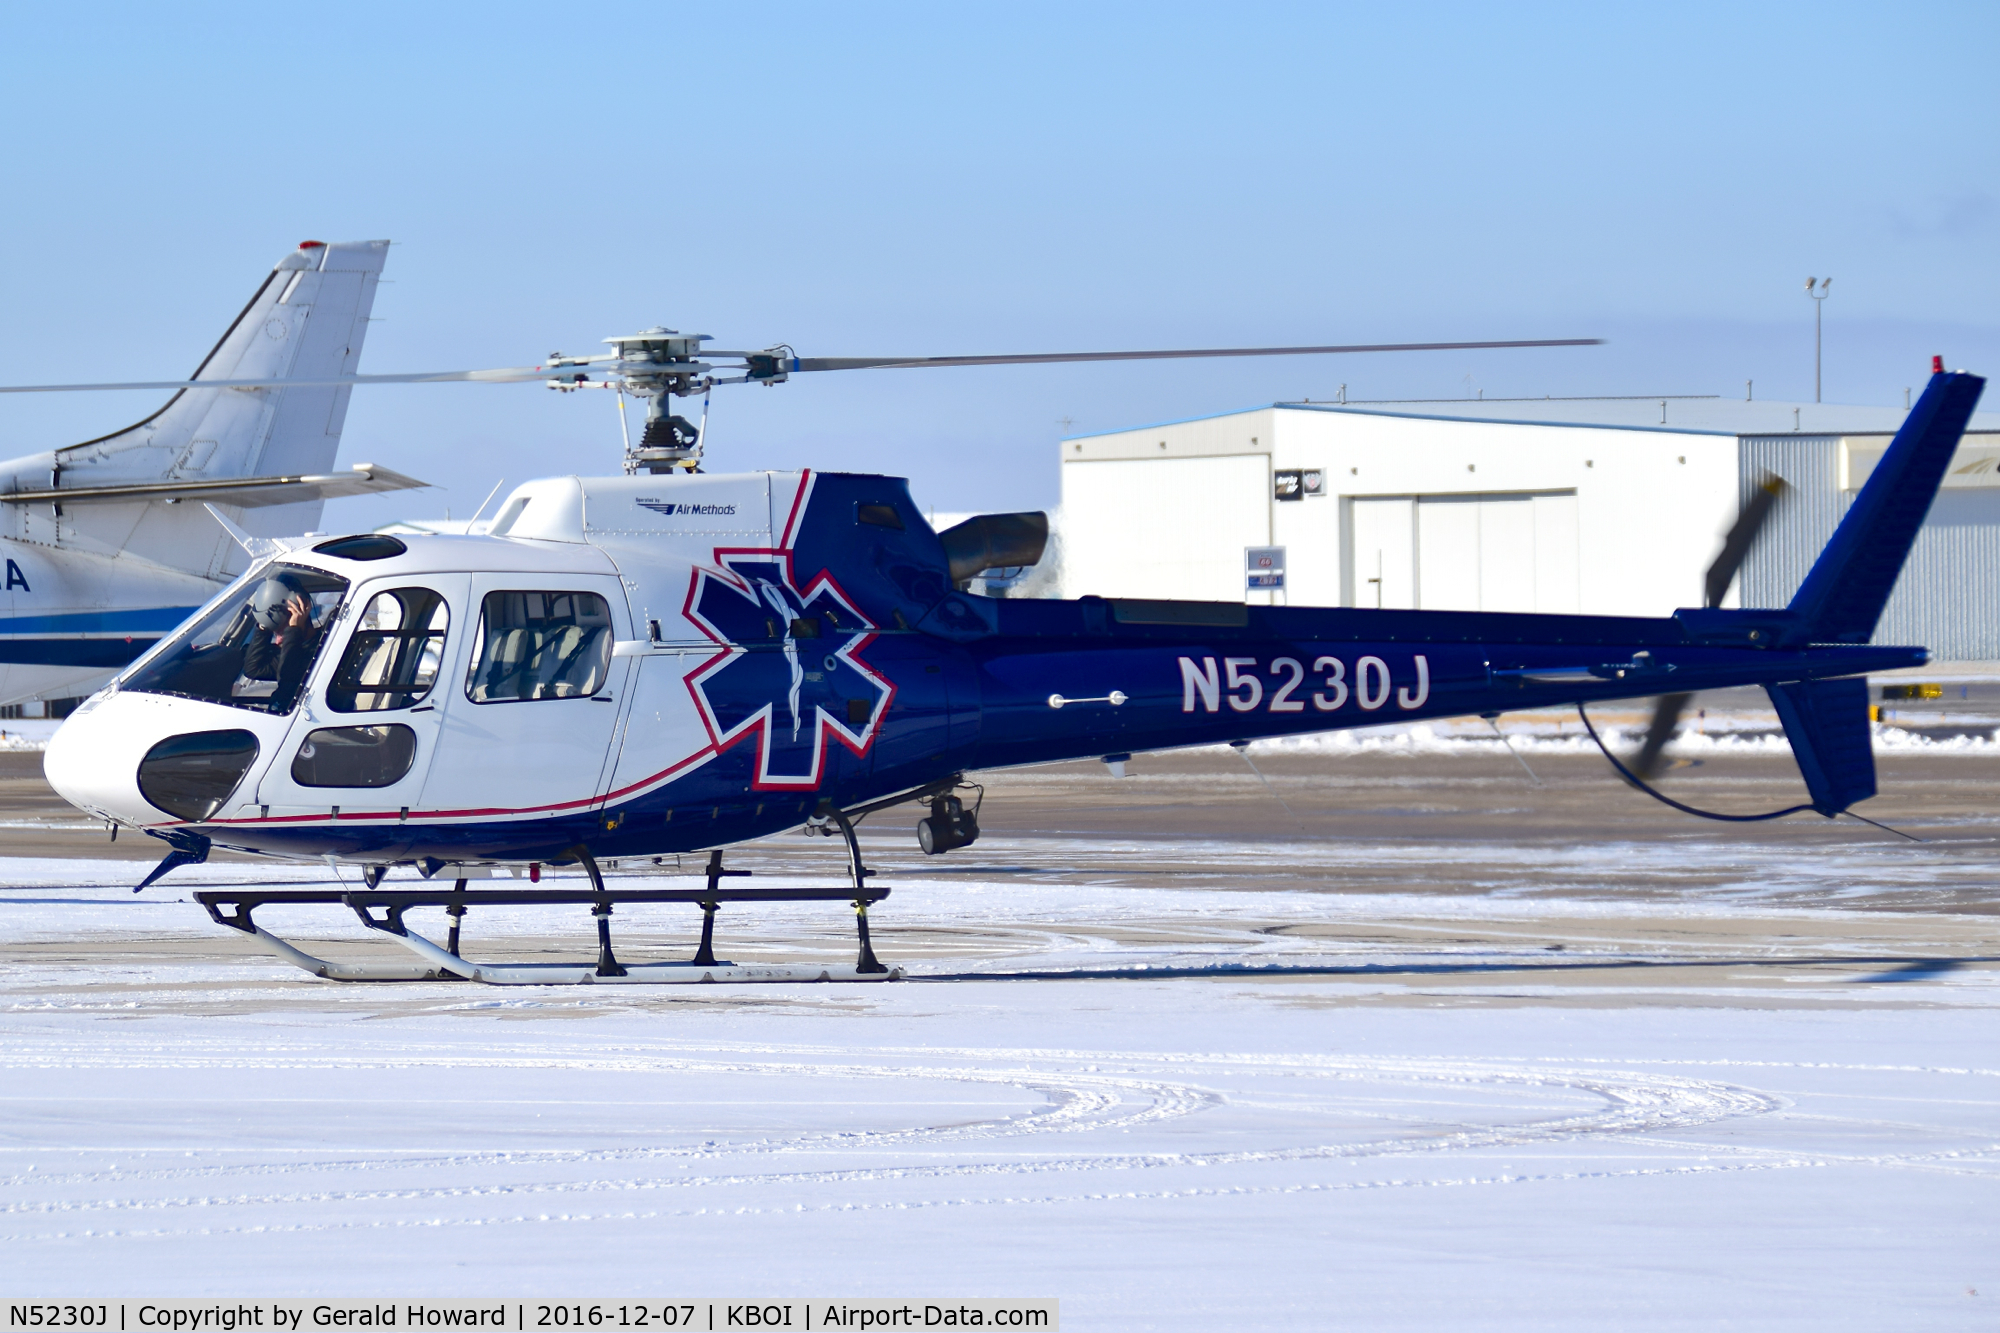 N5230J, 1999 Eurocopter AS-350B-3 Ecureuil Ecureuil C/N 3256, Just landed at Western Aircraft's ramp.